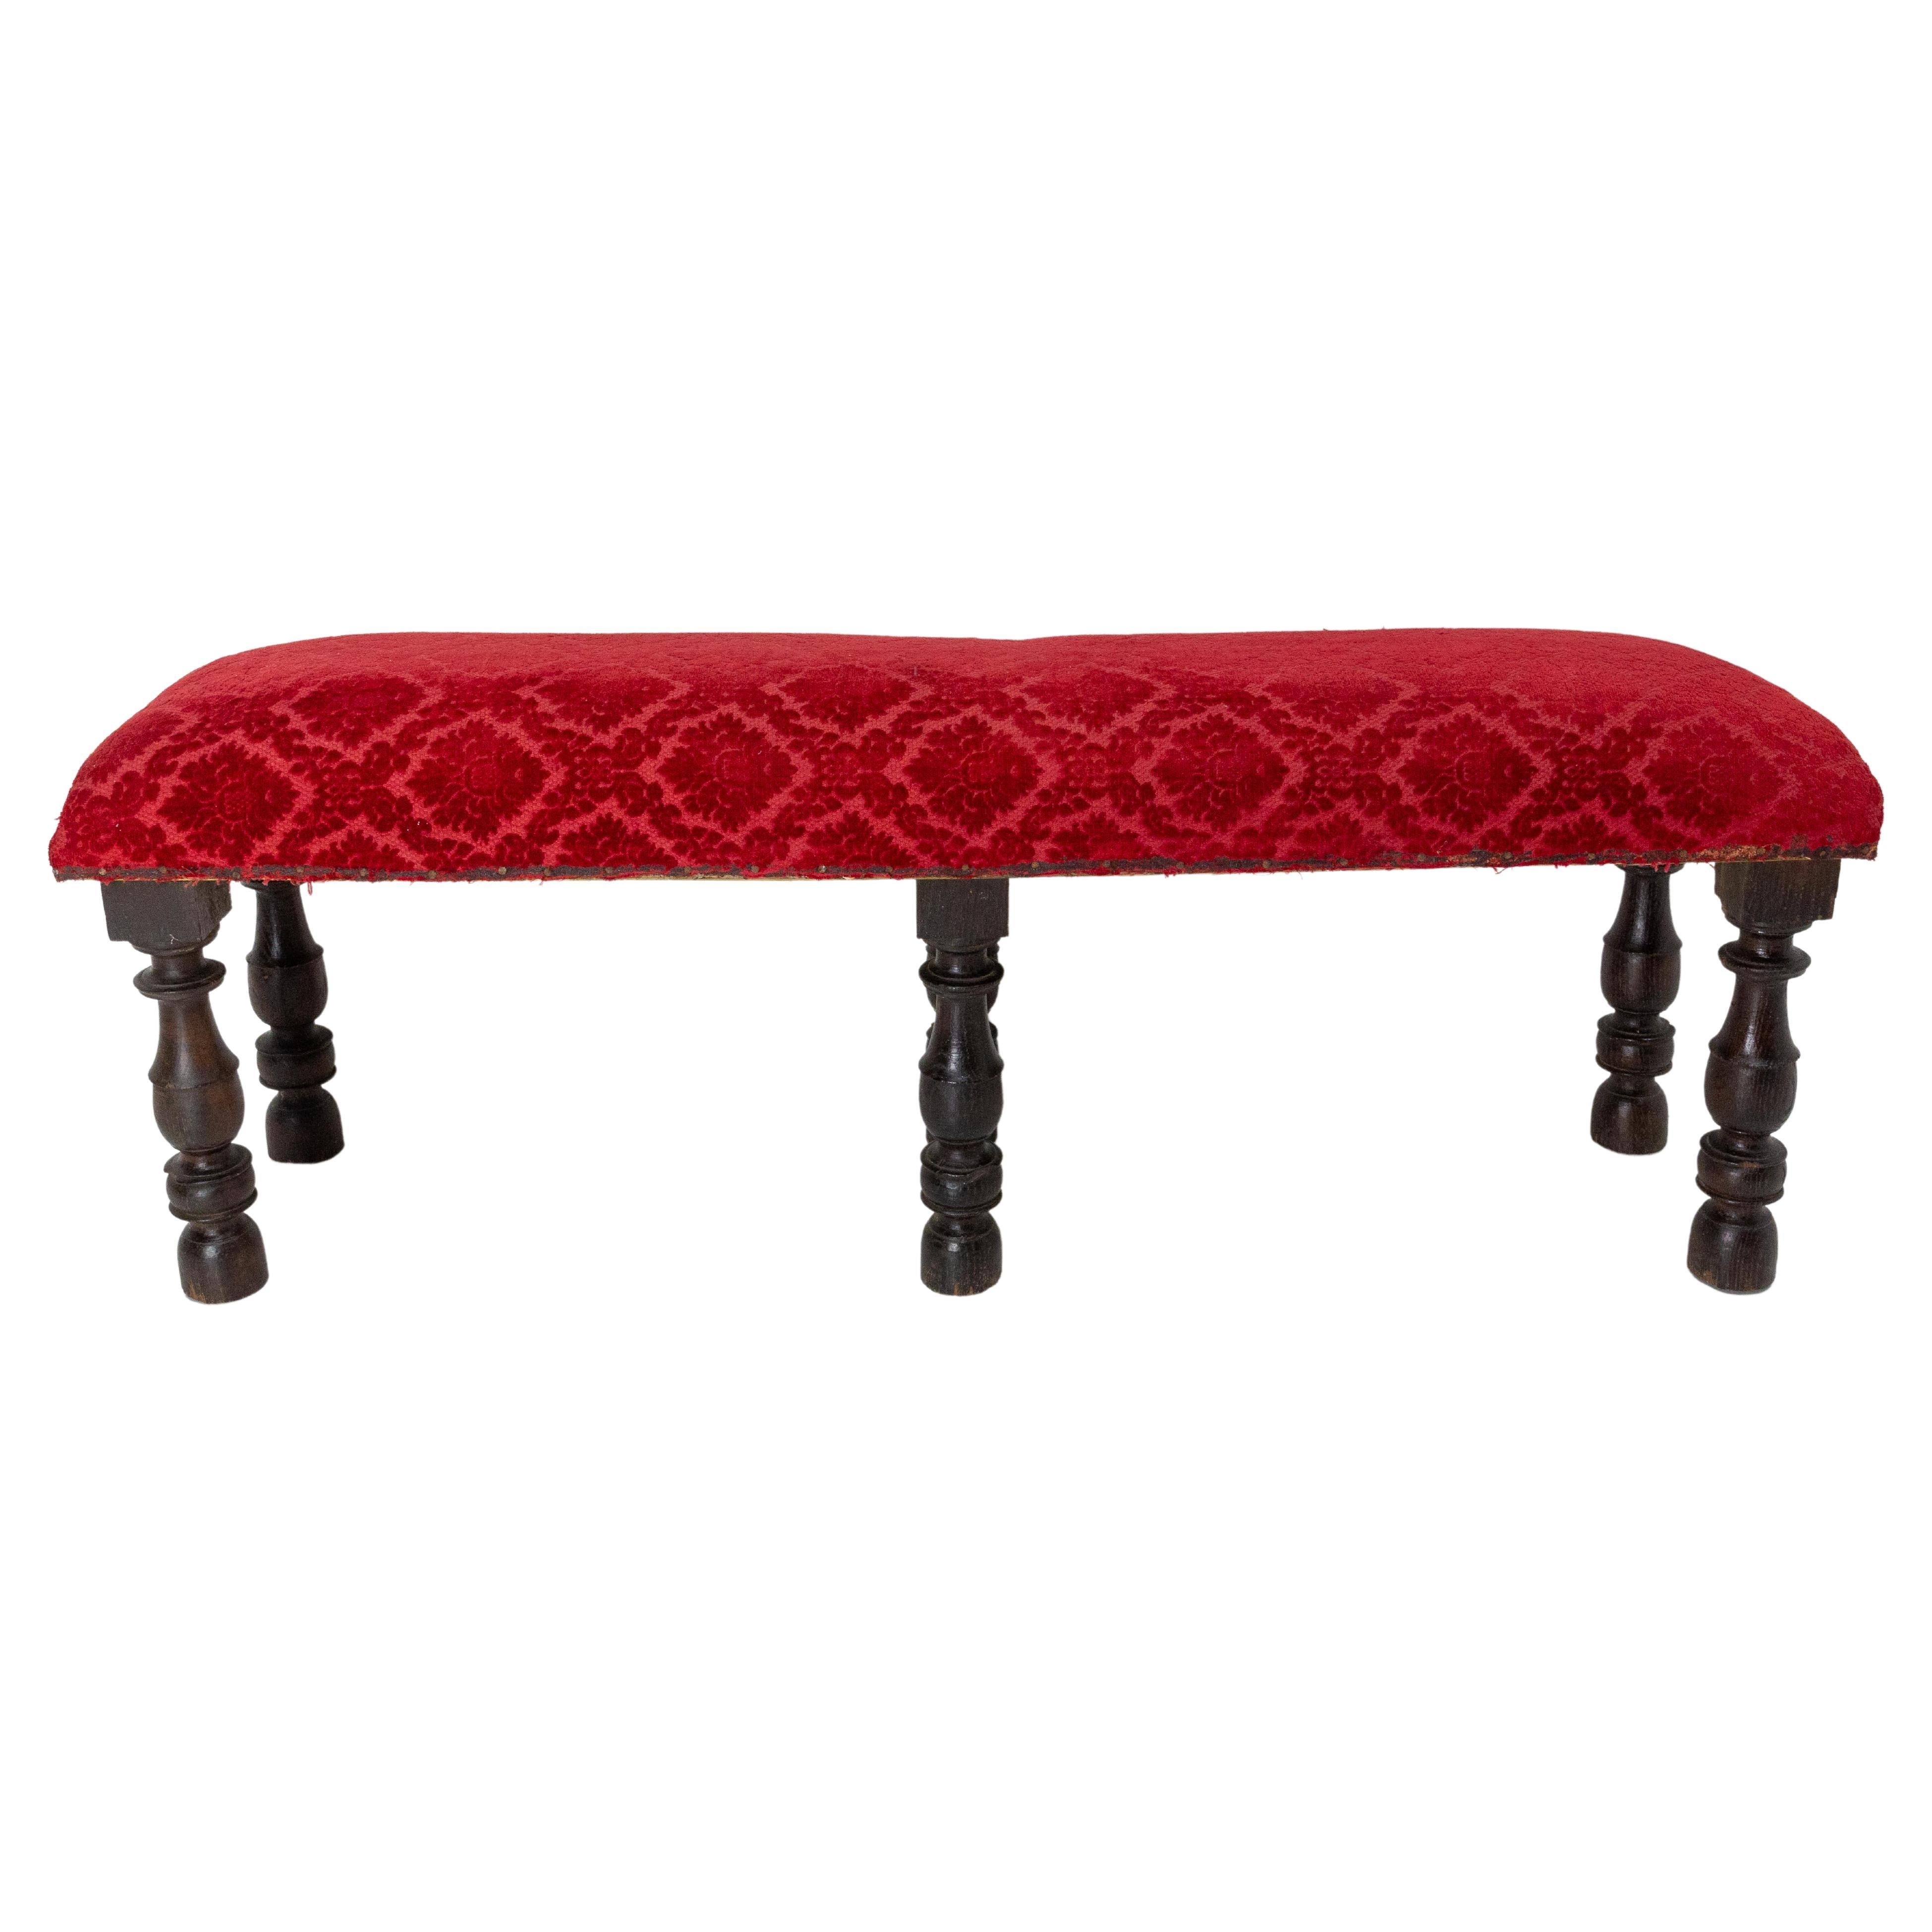 French Banquette Bench Chestnut and Upholstery, circa 1900